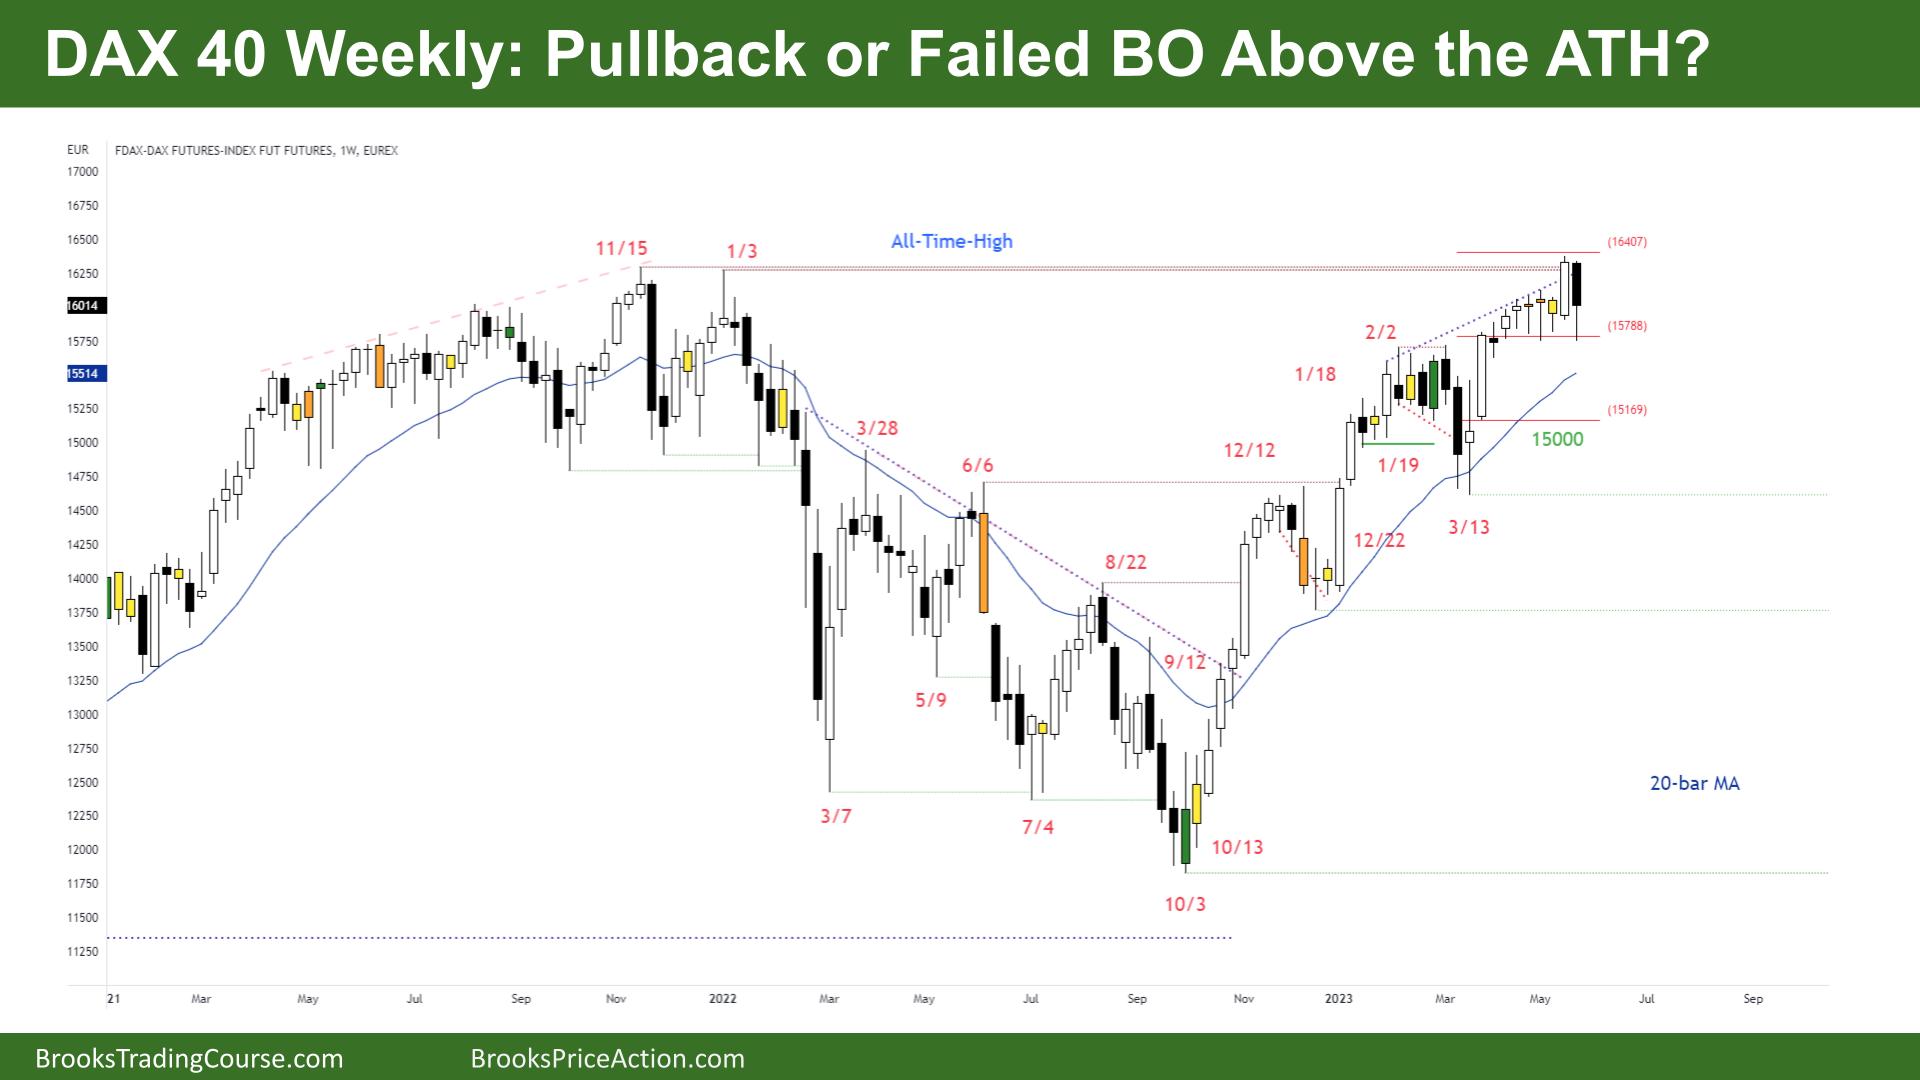 DAX 40 Breakout Pullback or Failure above the ATH